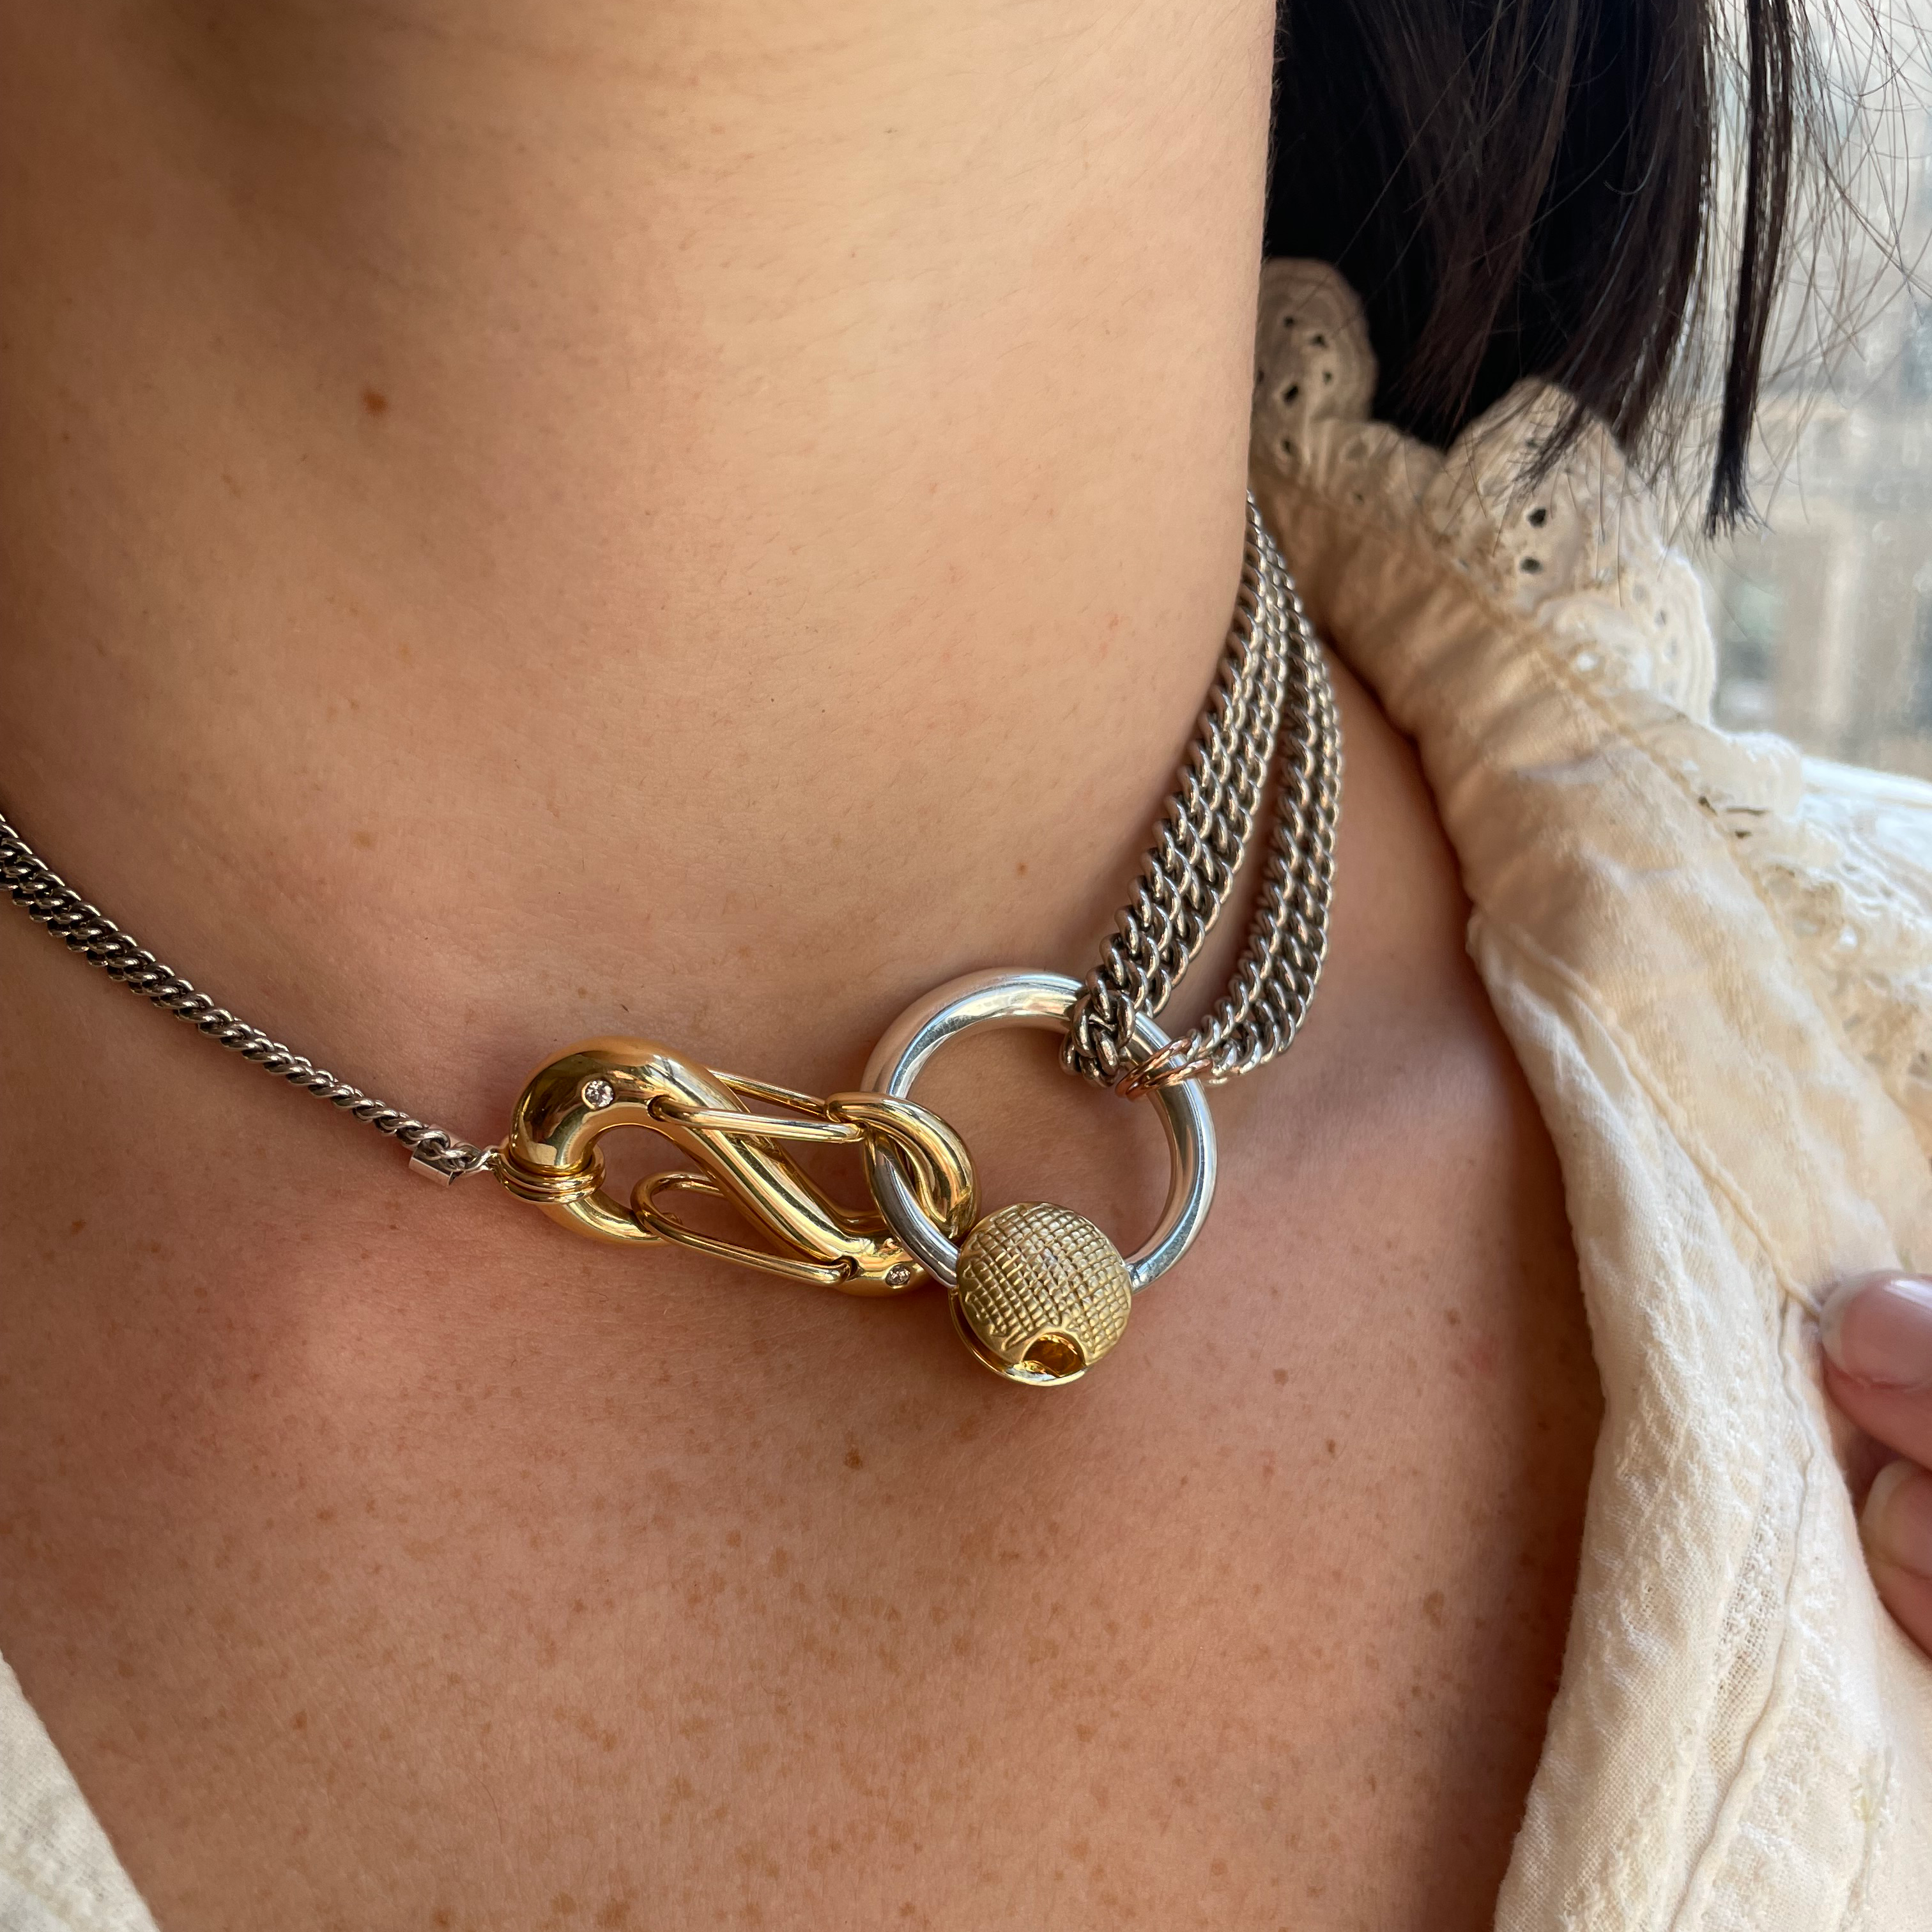 Close up of woman's decolletage wearing necklace with silver disc charm